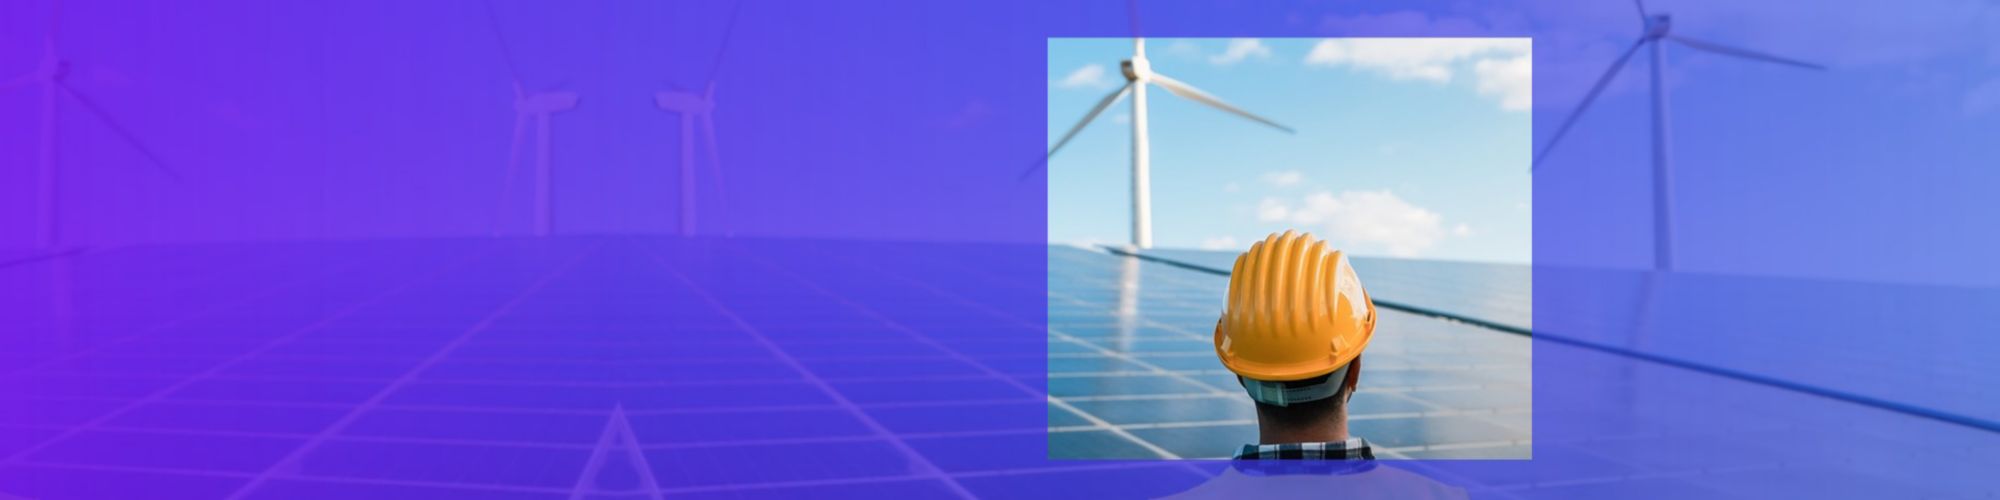 engineer looking at solar panels and wind turbines